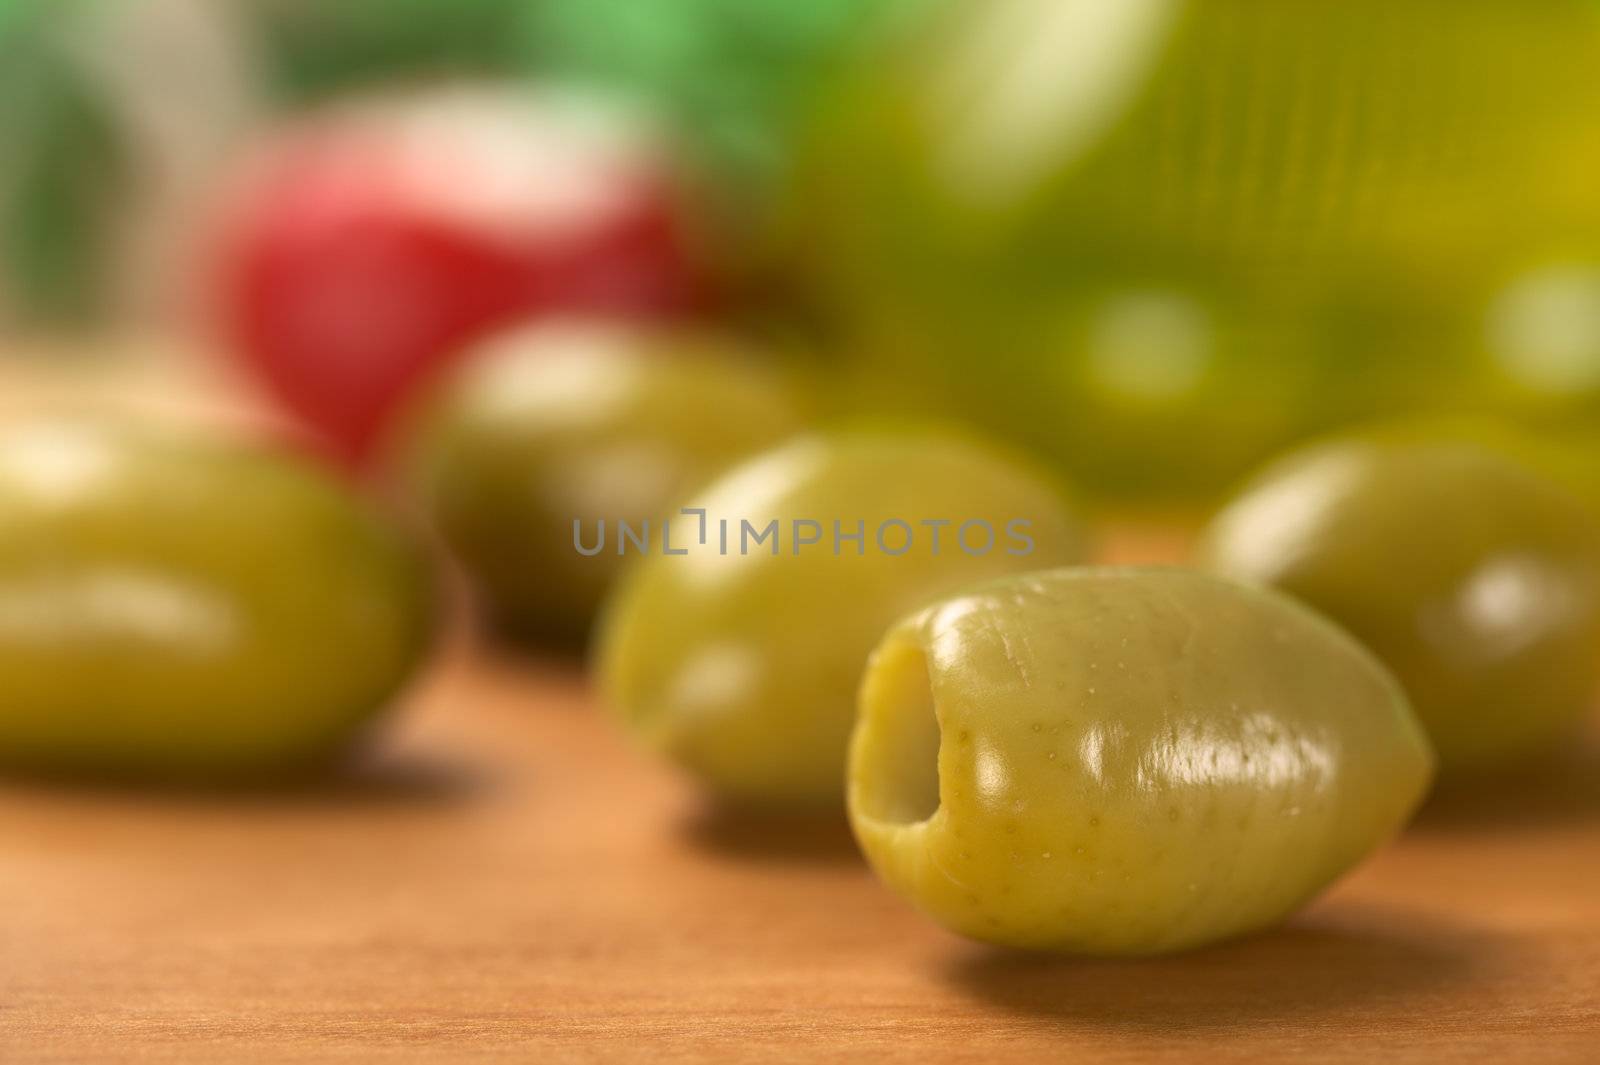 Green olive with olive oil in the back (Very Shallow Depth of Field, Focus on the front close to the opening of the right olive)